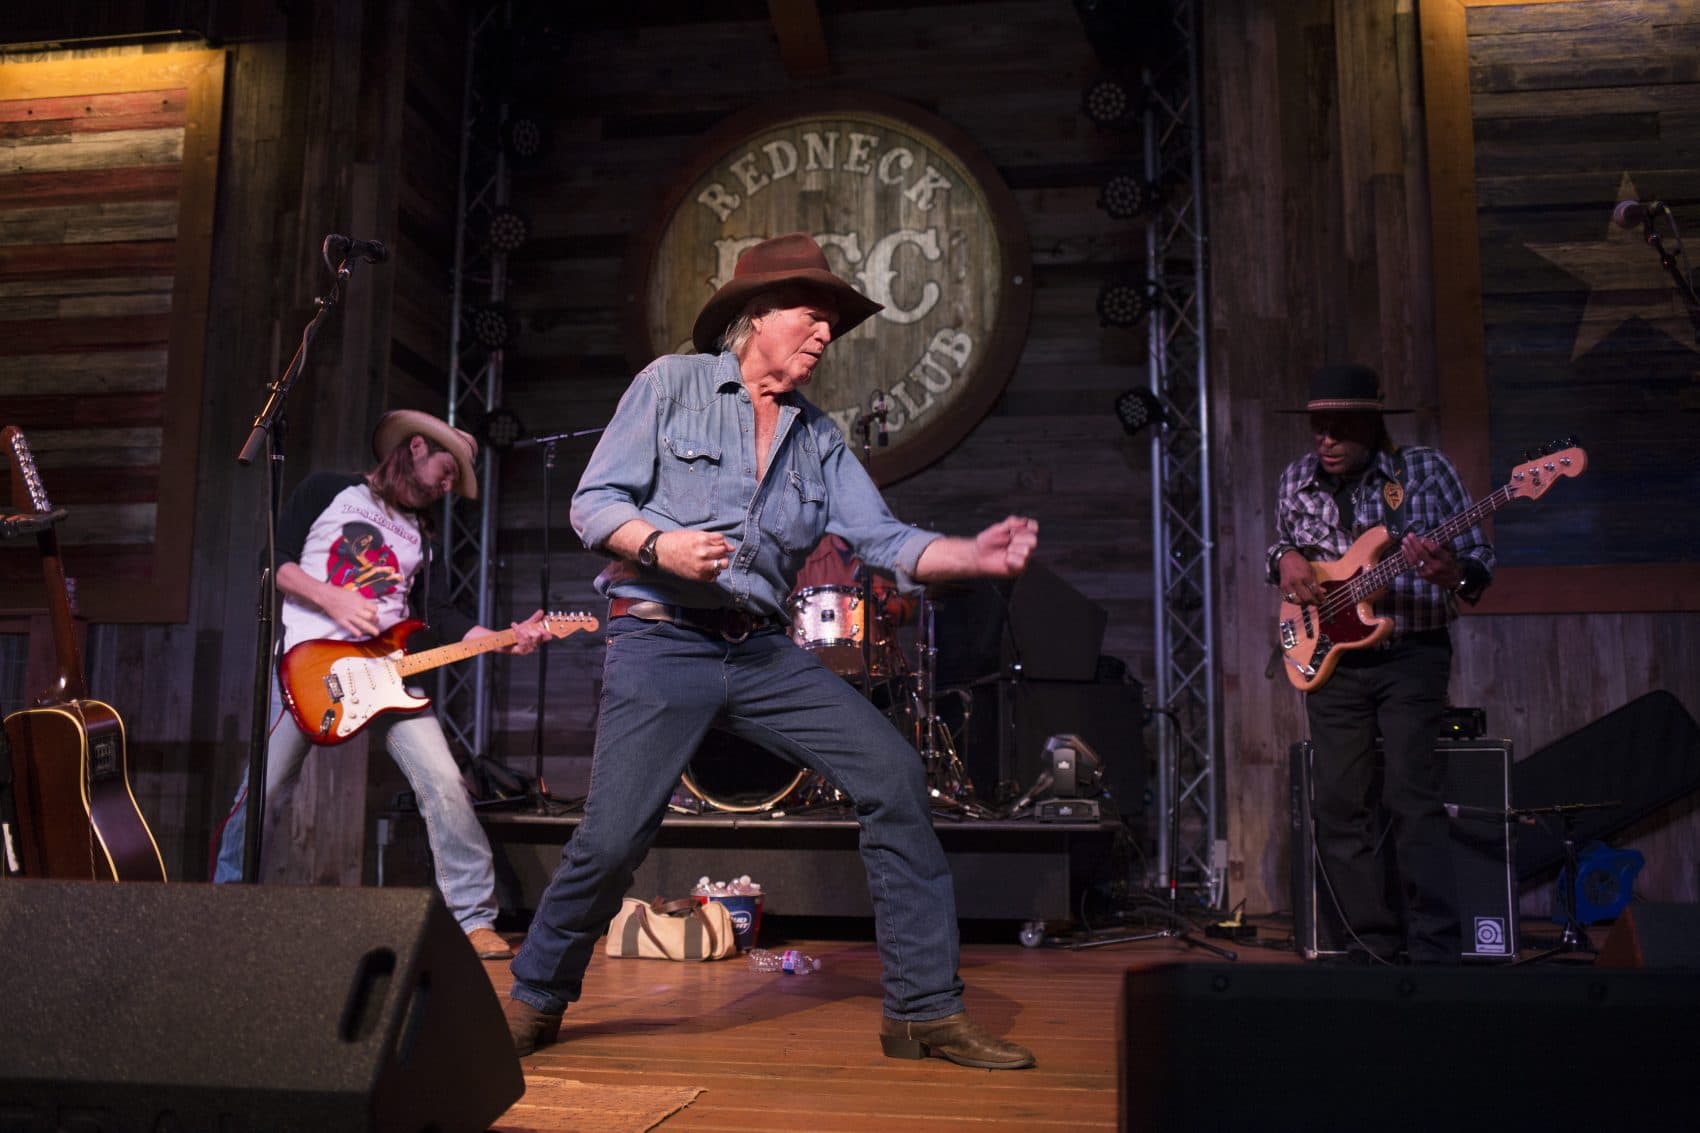 STAFFORD, TX -- Billy Joe Shaver dancing on stage during the show at the Redneck Country Club in Stafford, Texas Nov. 18, 2016. (Photo by Michael Stravato/For the Washington Post) 